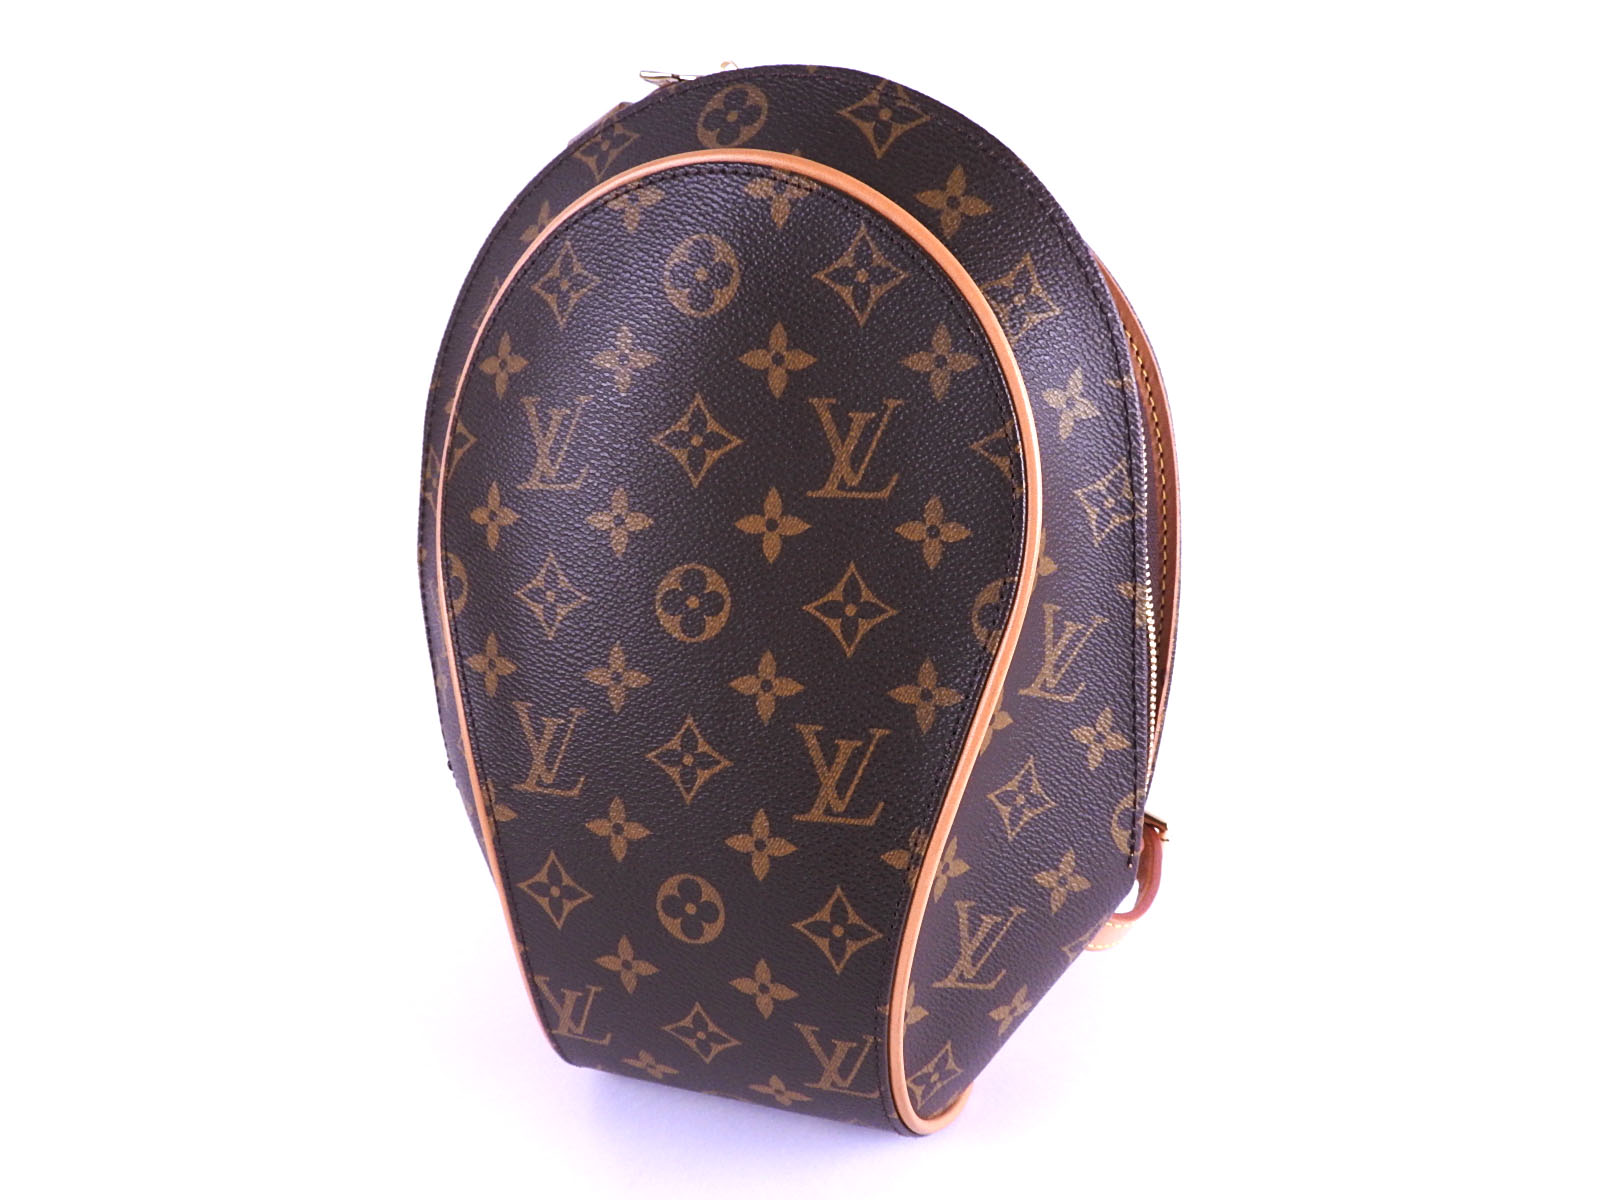 A Guide to Authenticating the Louis Vuitton Ellipse Shopping, MM, and  Backpack (Authenticating Louis Vuitton)